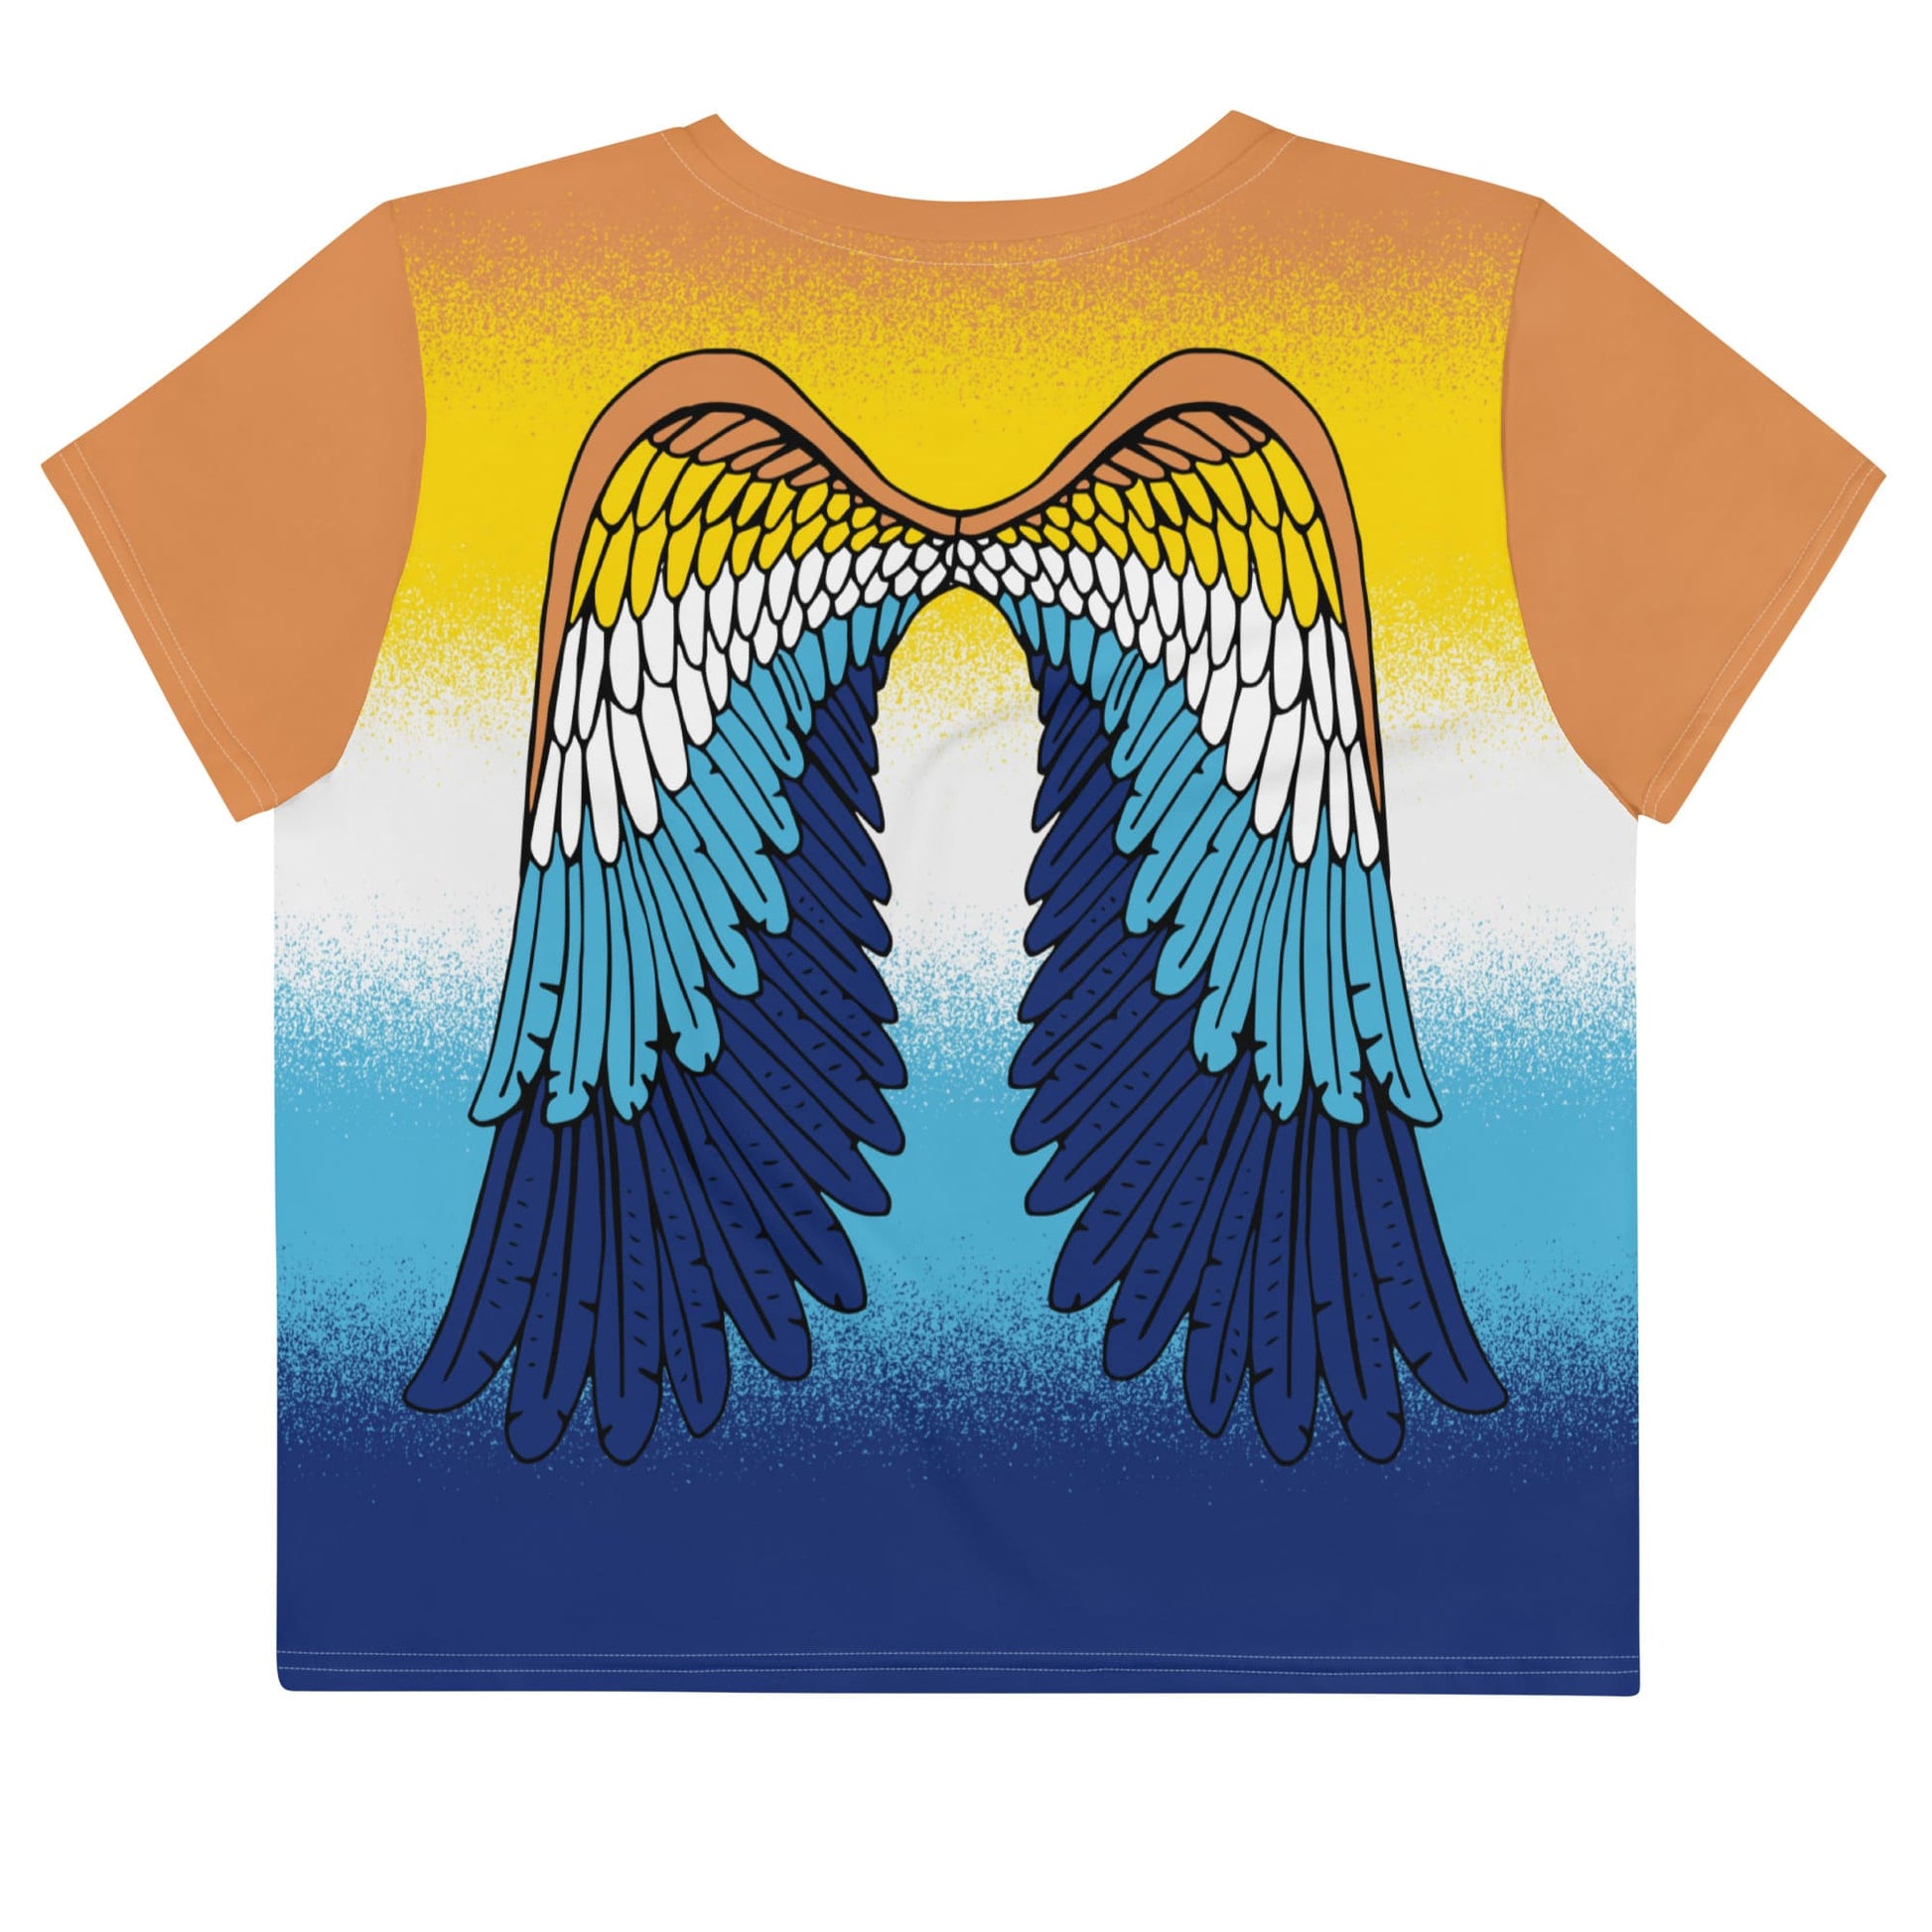 aroace crop top, aro ace pride cropped shirt with wings on back, flatlay back